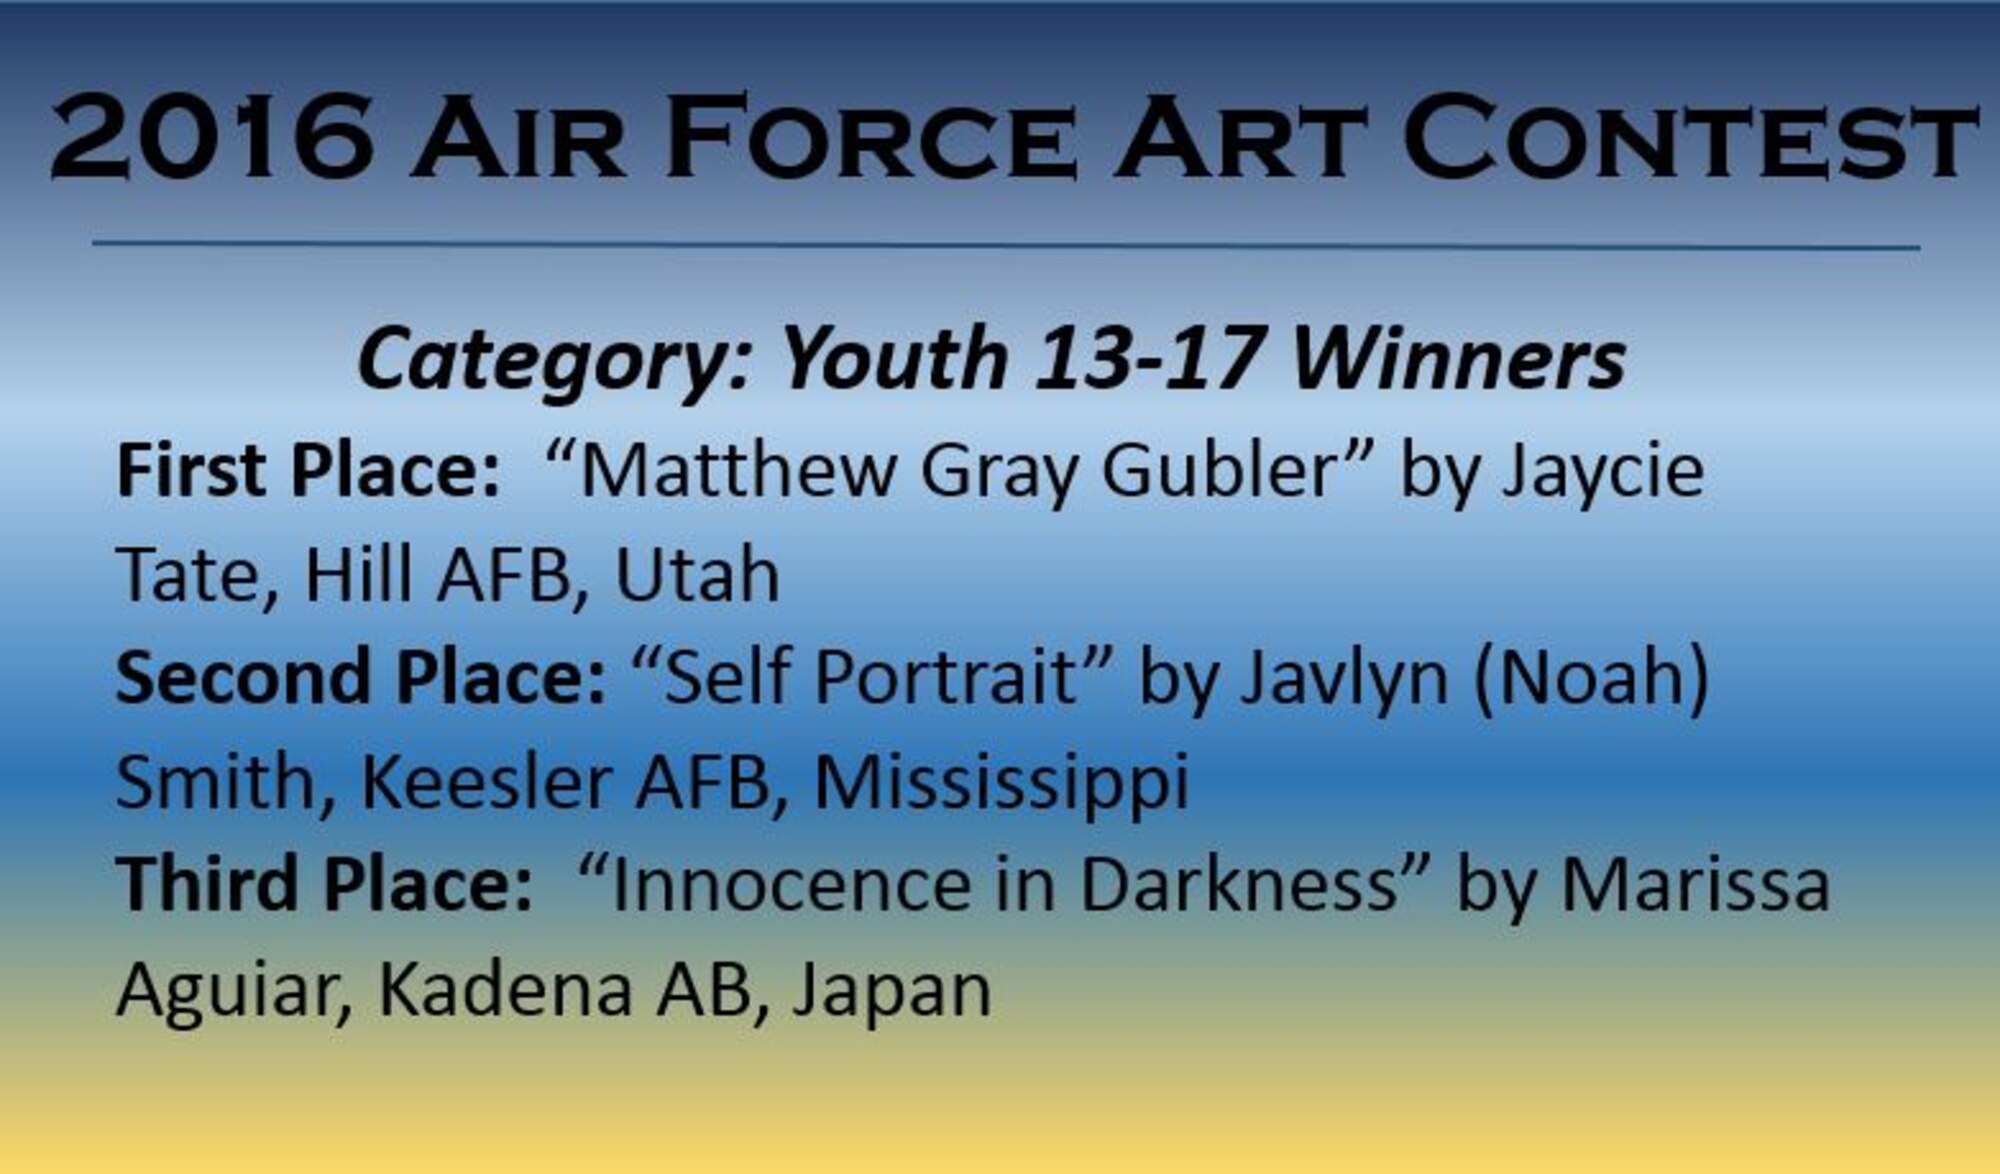 Congratulations to the 2016 Air Force Art Contest Youth 13-17 Winners.